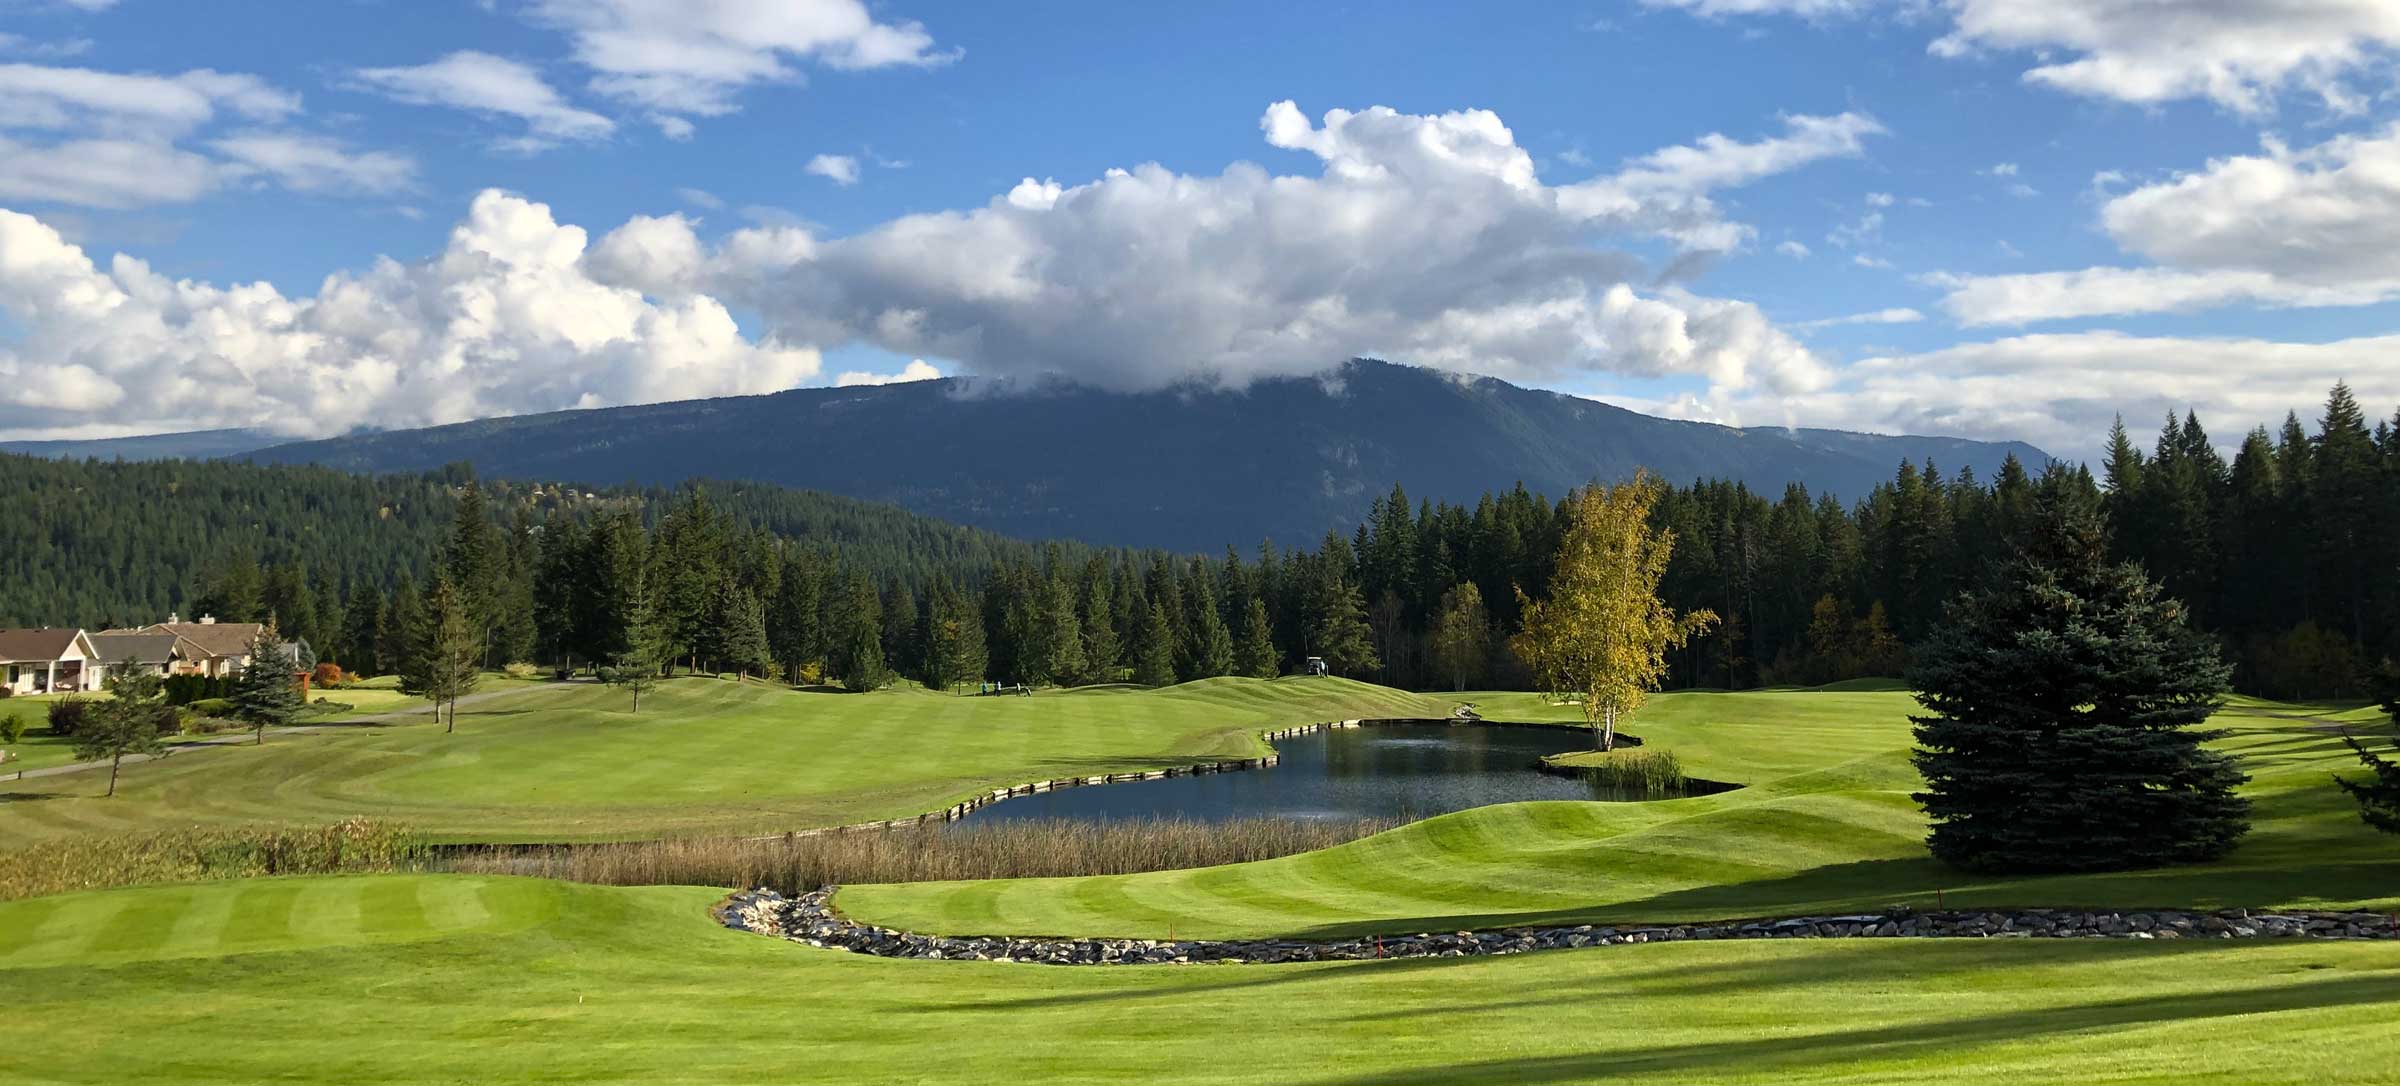 Shuswap Lake Golf Course & Driving Range: Shuswap Lake Golf Course is a professionally designed 18 hold golf course located in the heart of Blind Bay.